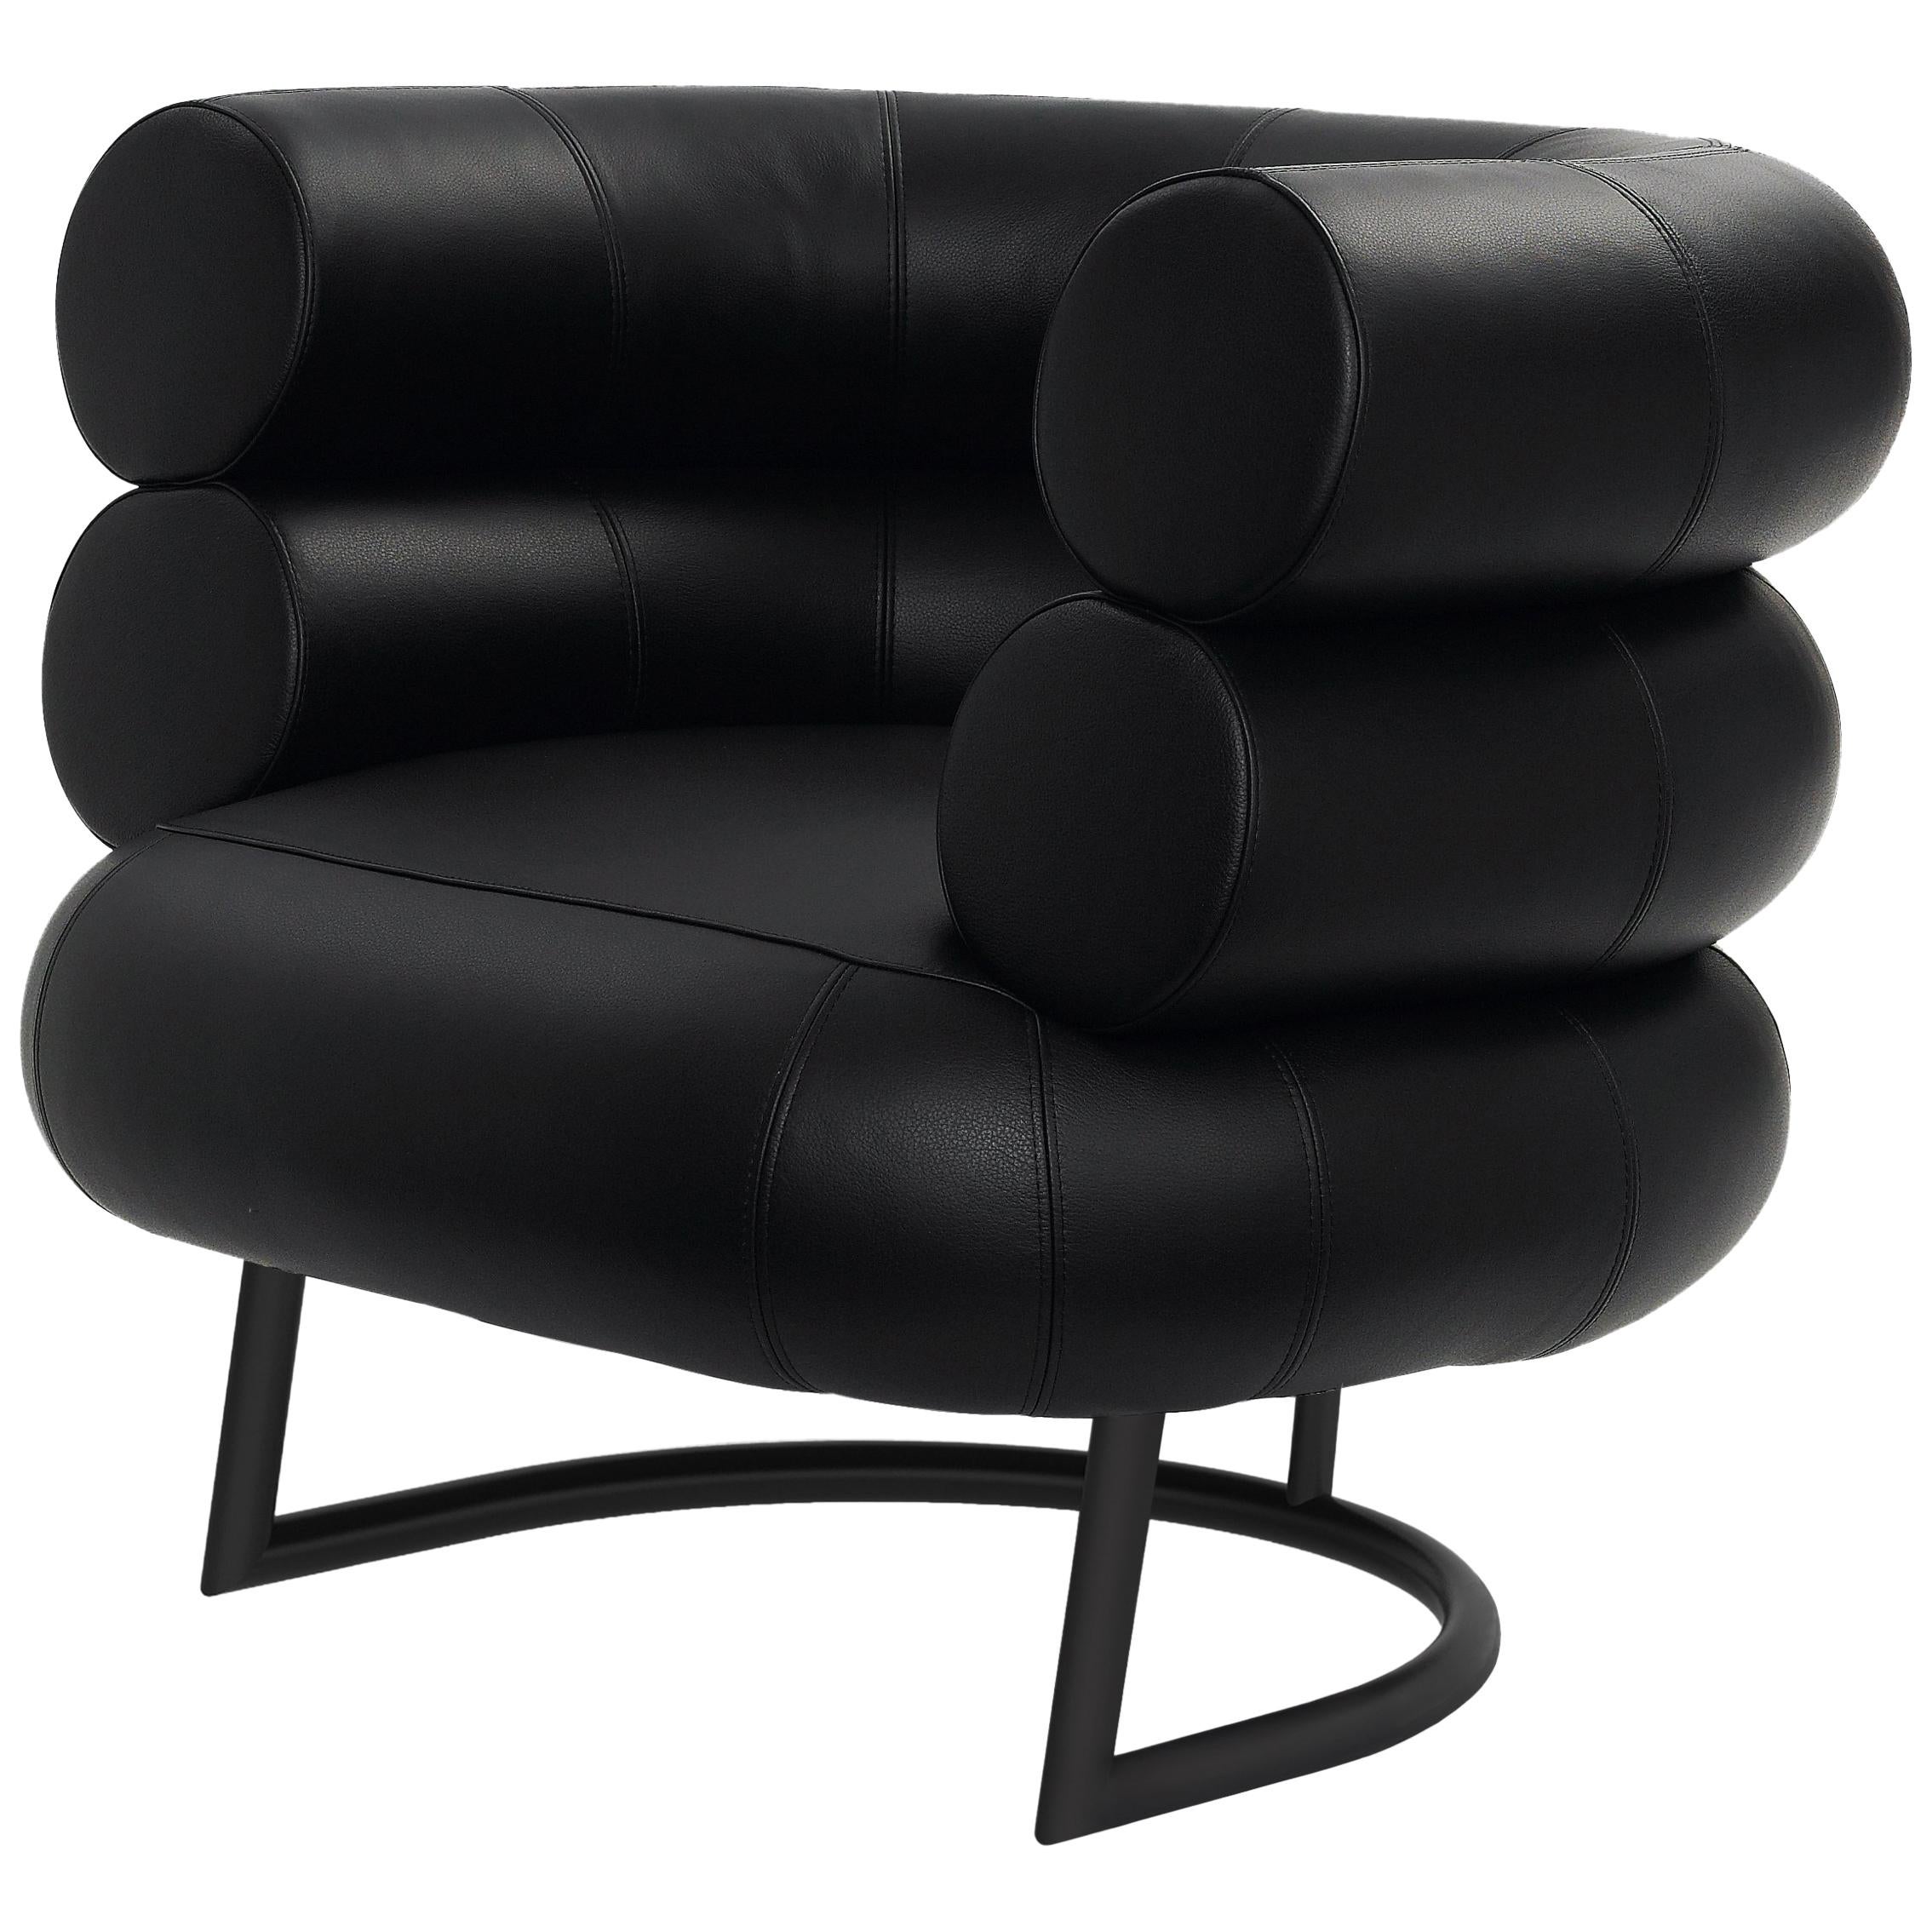 ClassiCon Bibendum Armchair in Black Leather with Black Base by Eileen Gray